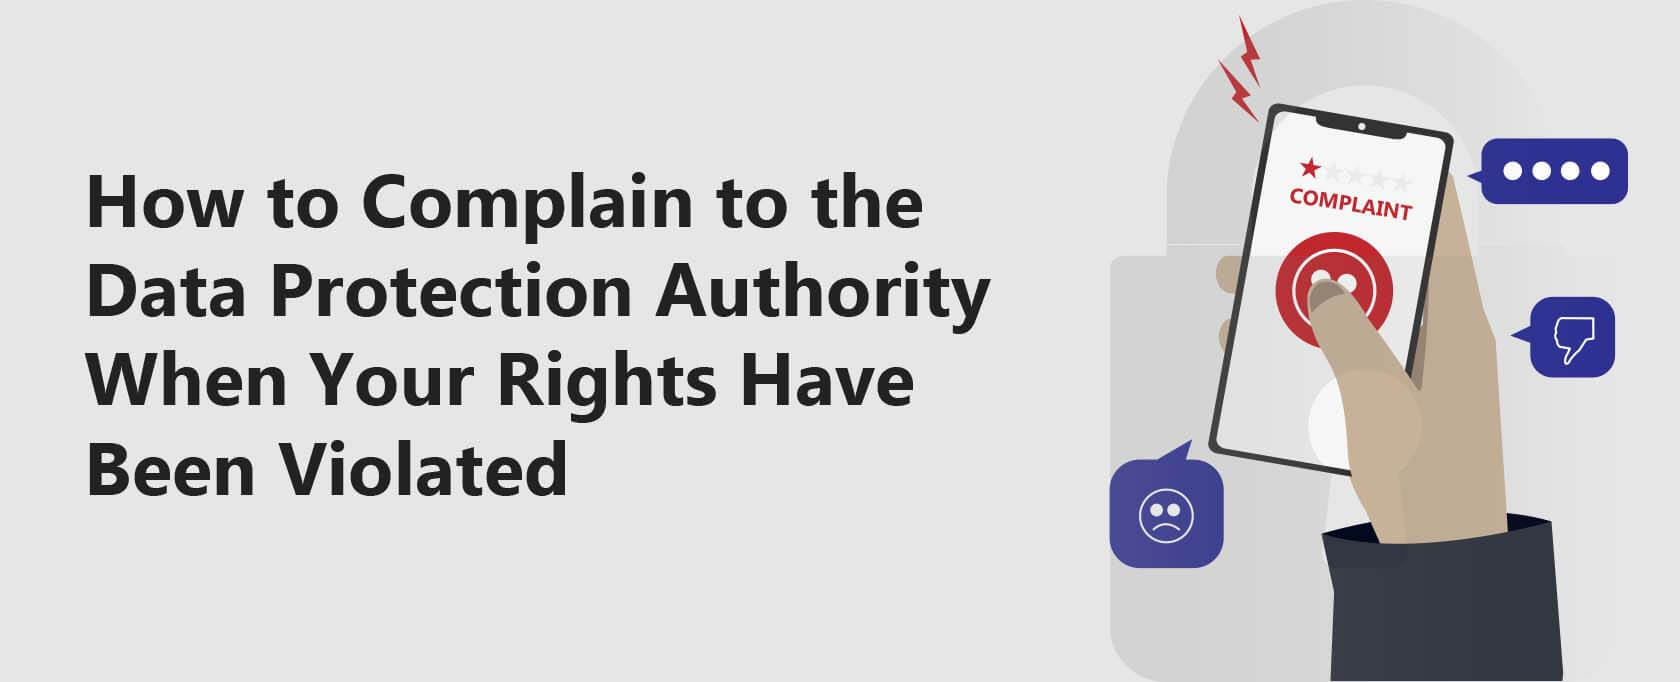 How to Complain to the Data Protection Authority When Your Rights Have Been Violated